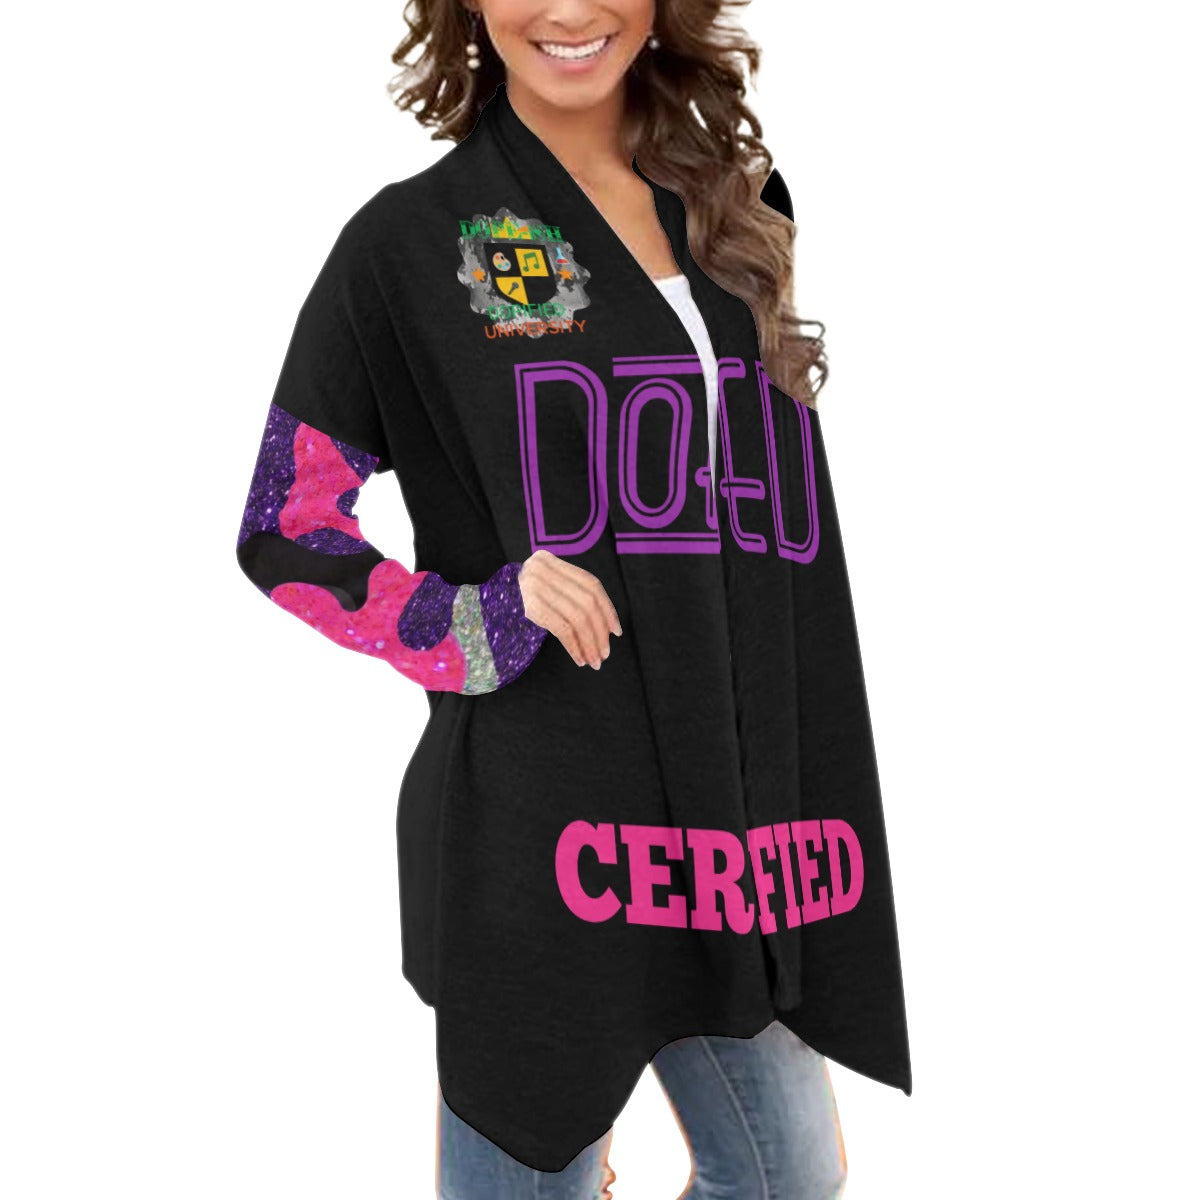 She DopiFIED Cardigan With Long Sleeve